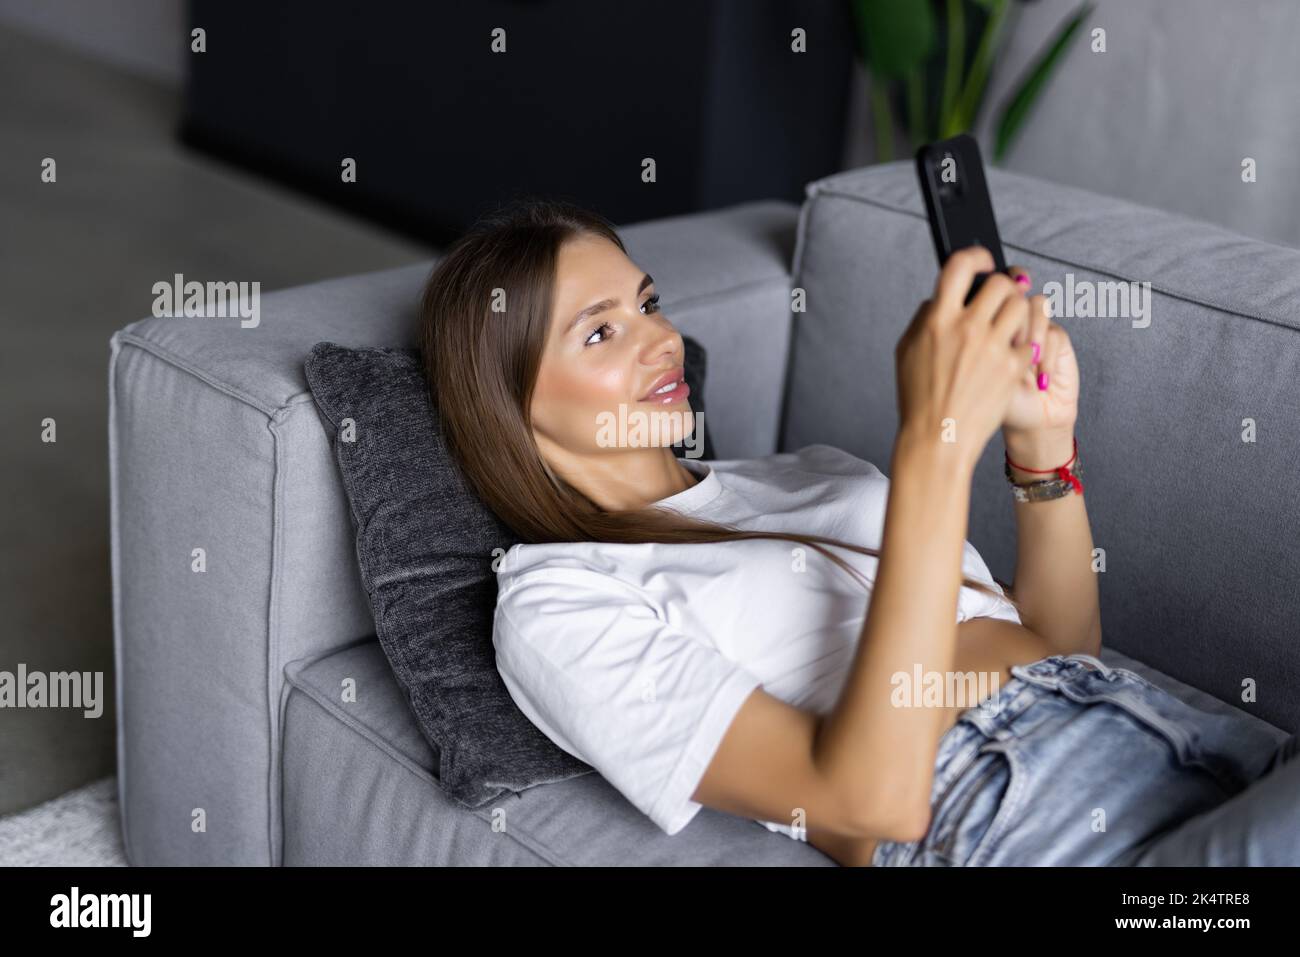 Excited woman watching media content on line in a mobile phone sitting on a couch in the living room Stock Photo